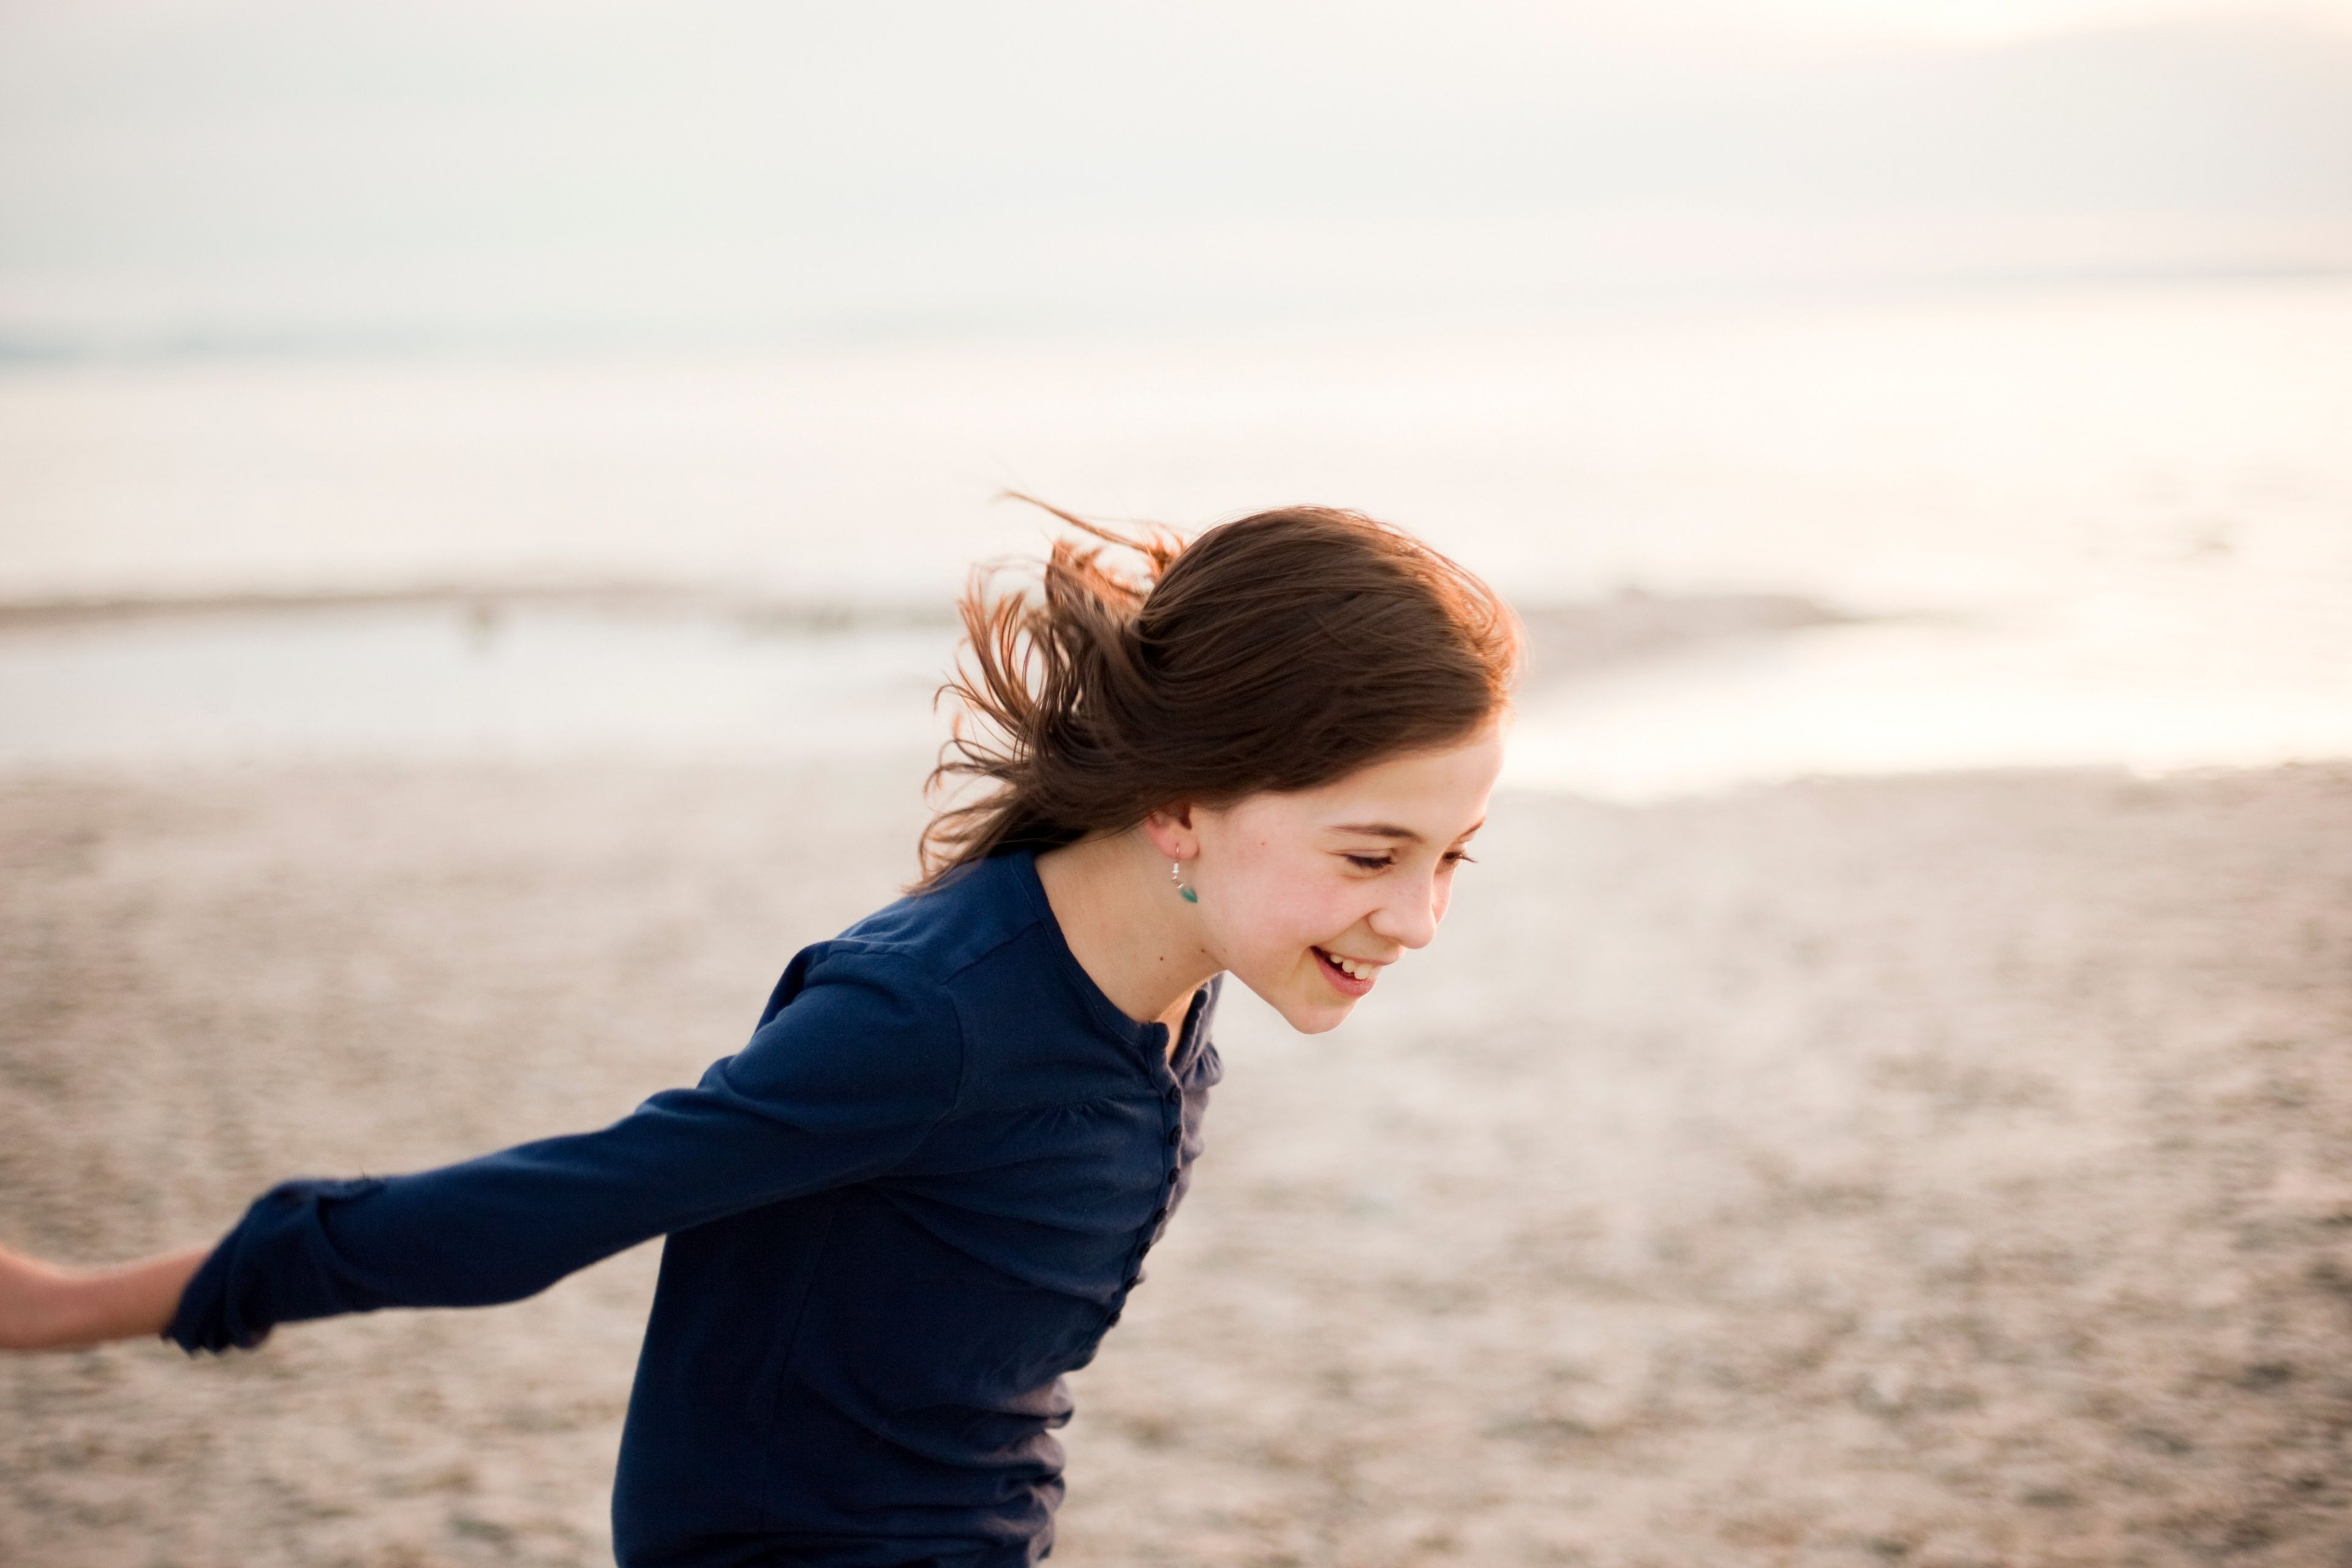 A young girl runs on the beach, with sand and water in the background.